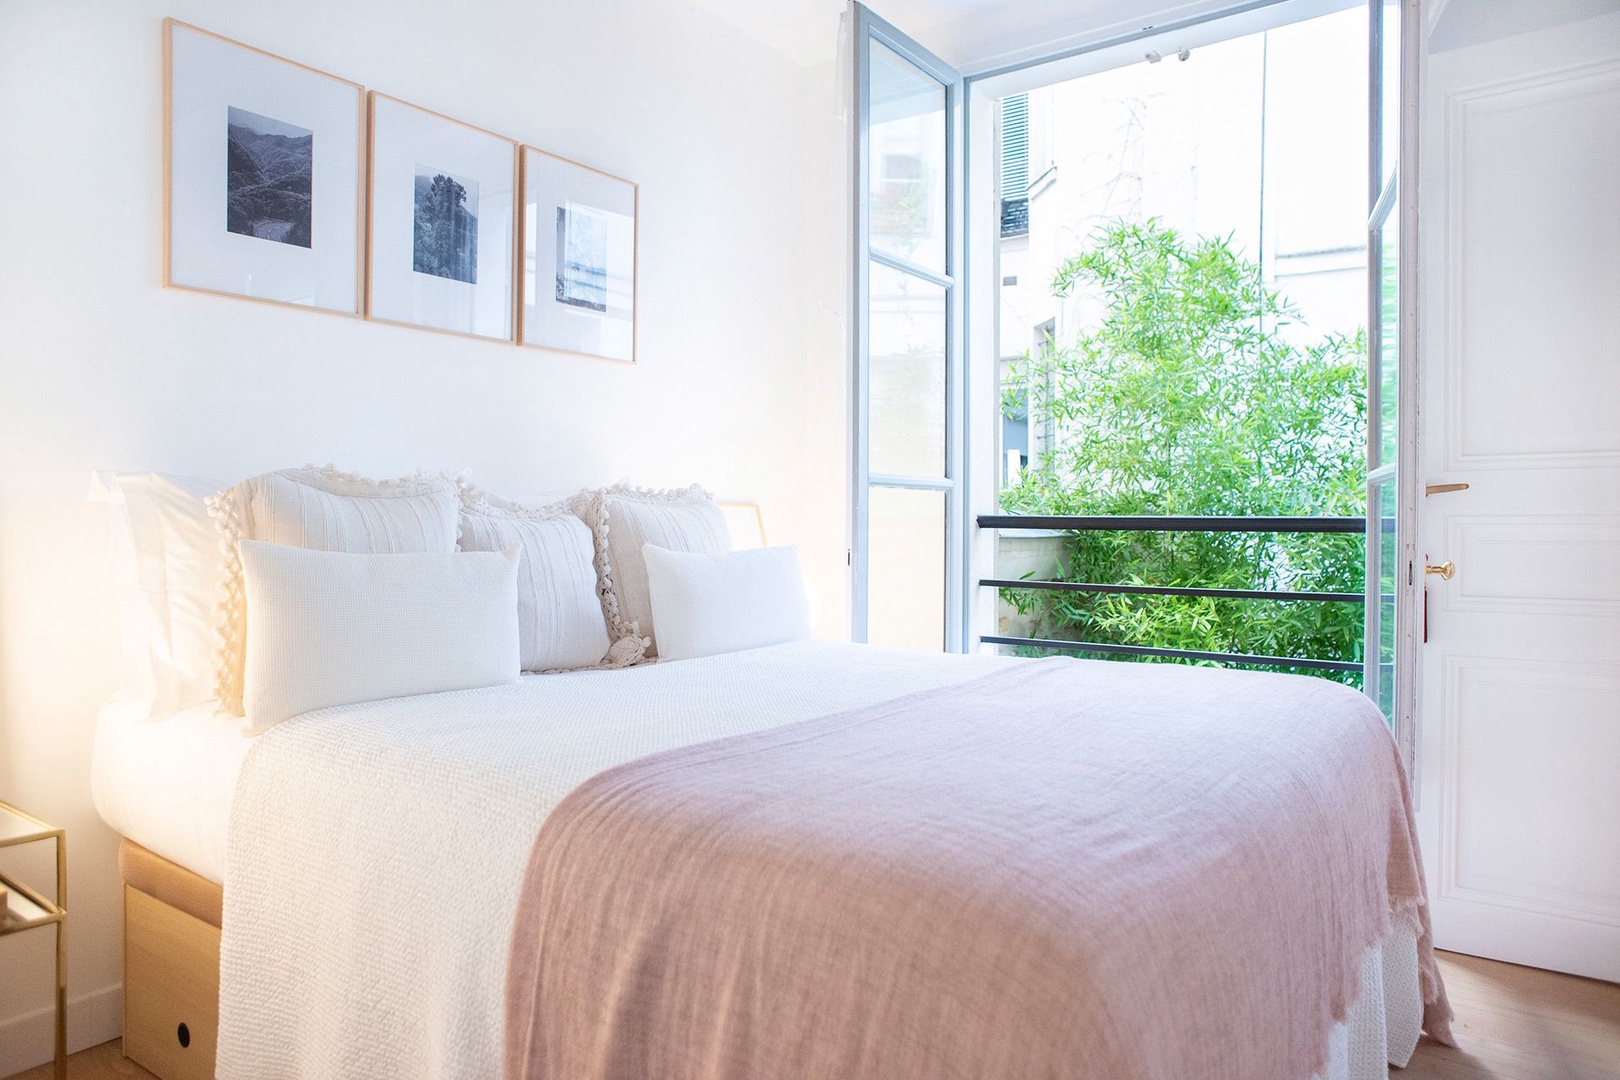 Wake up next to the French window with lovely courtyard views.